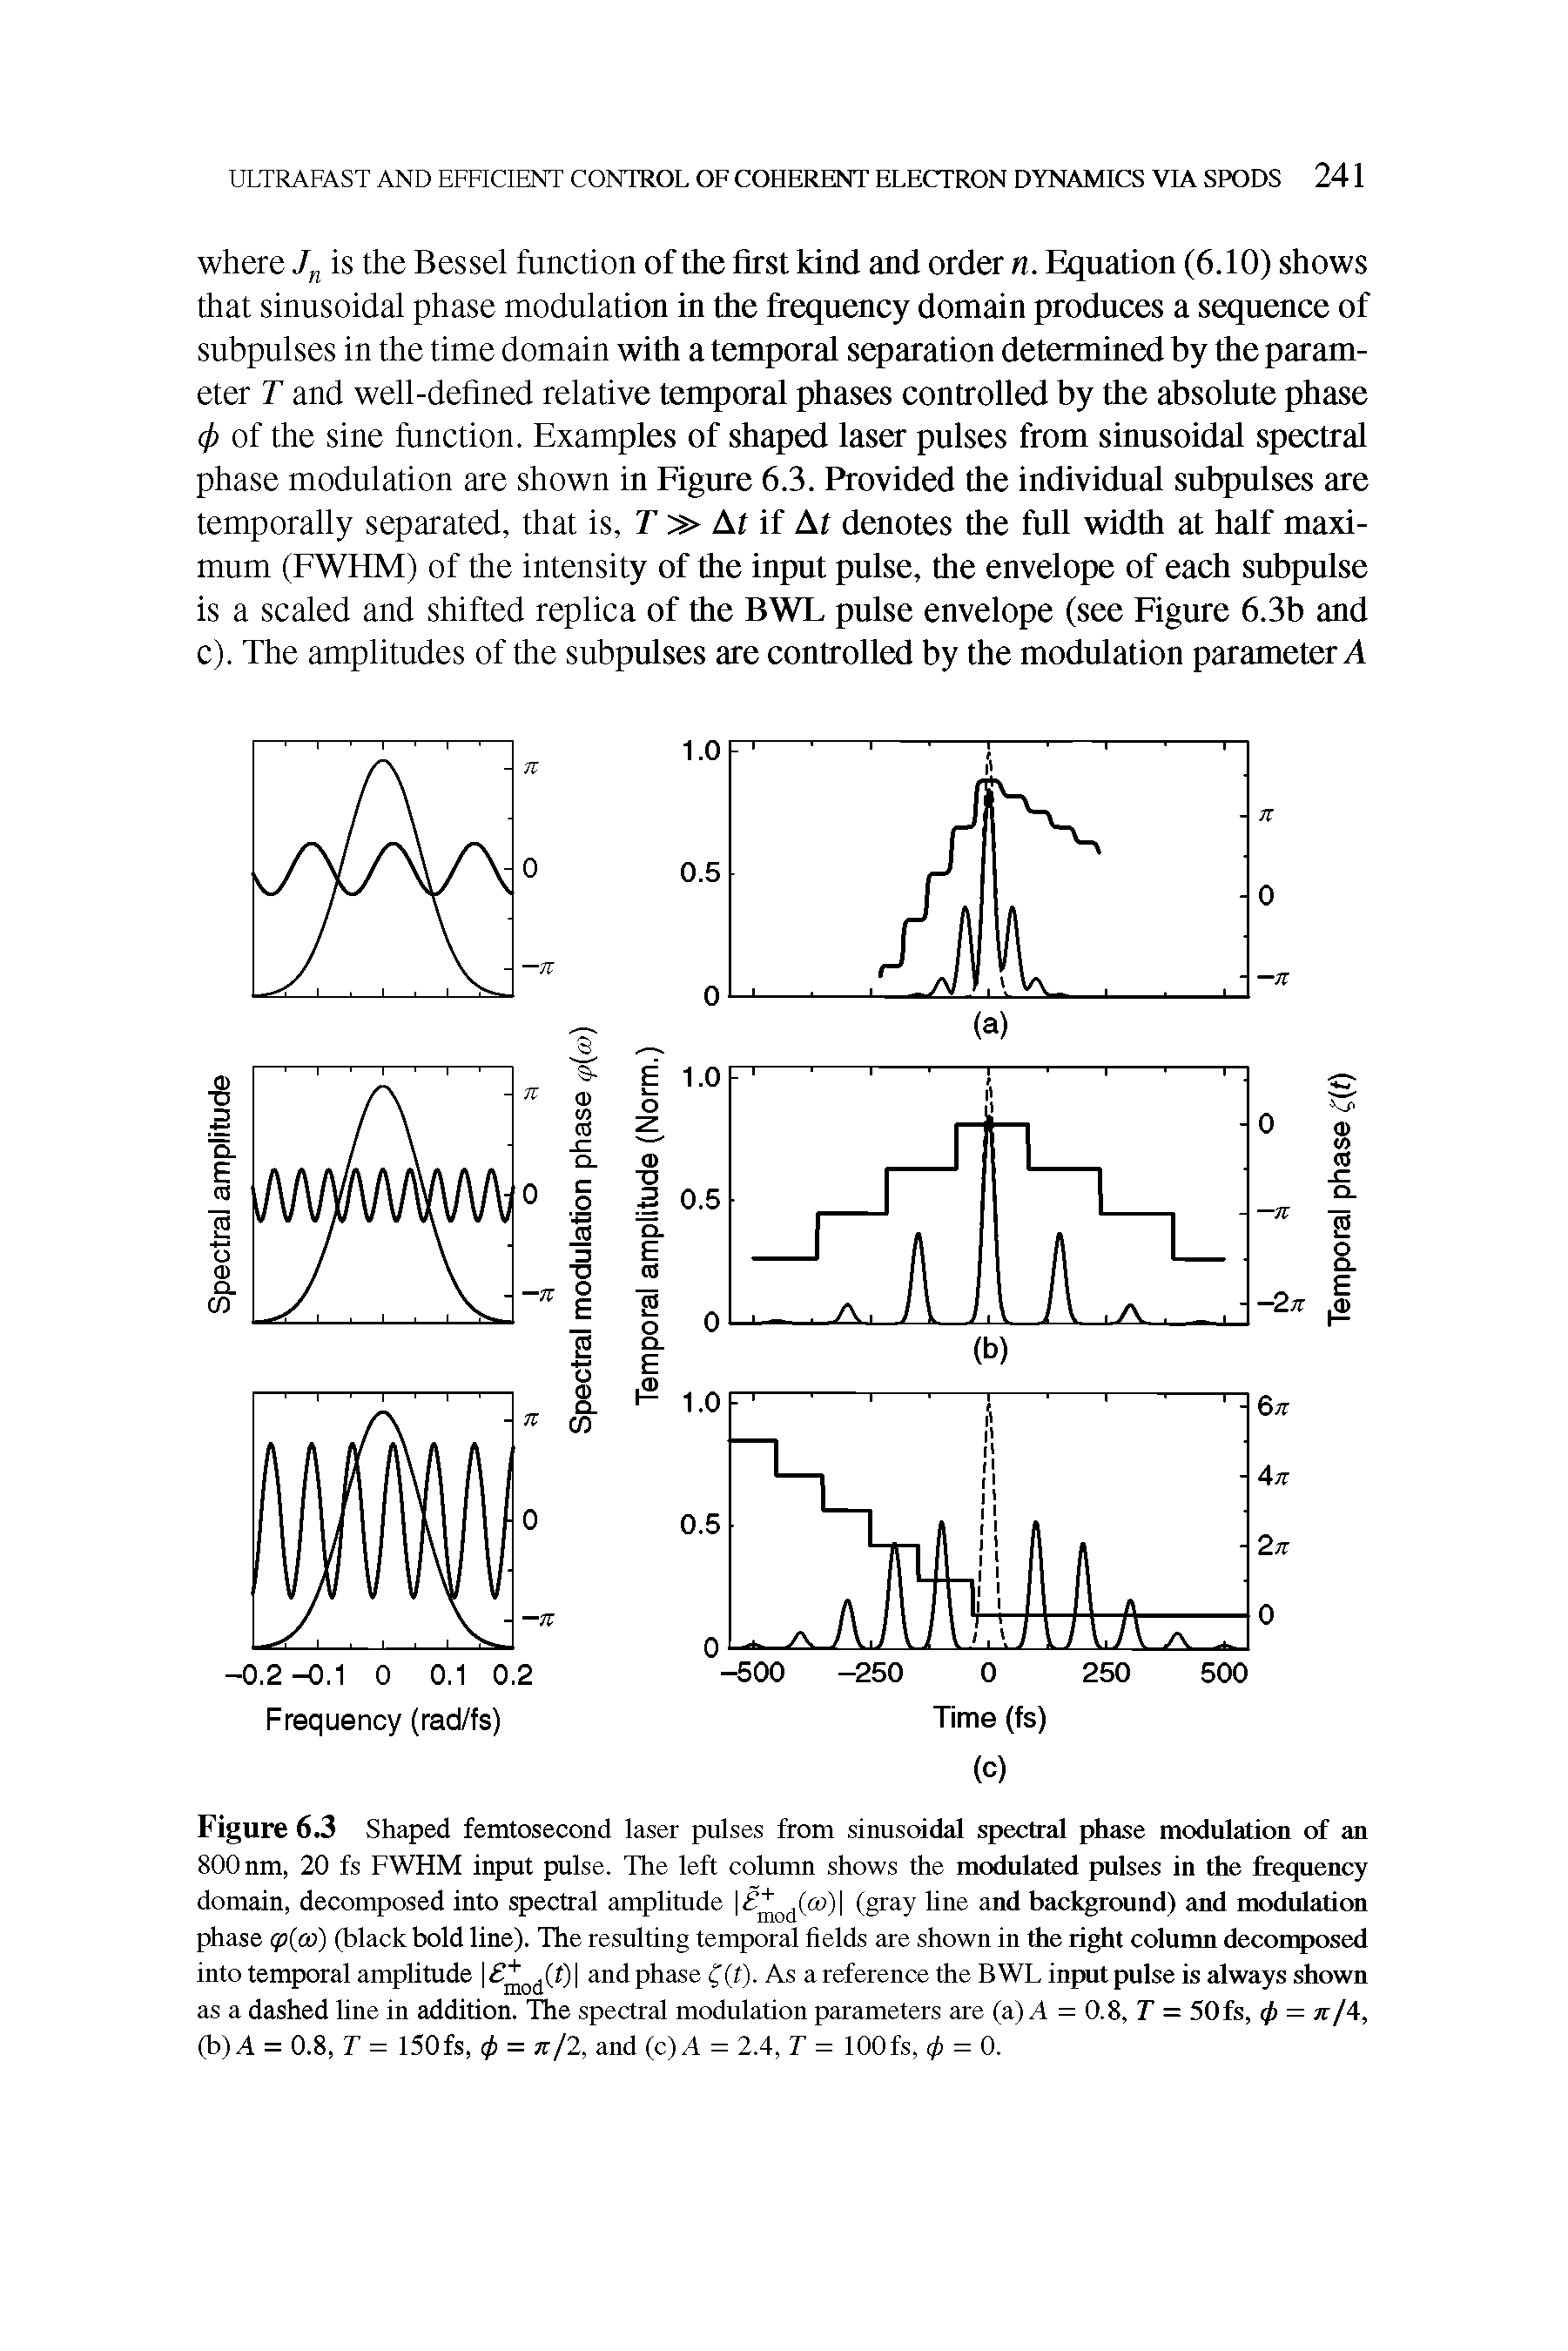 Figure 6.3 Shaped femtosecond laser pulses from sinusoidal spectral phase modulation of an 800 nm, 20 fs FWHM input pulse. The left column shows the modulated pulses in the frequency domain, decomposed into spectral amplitude (gray line and background) and modulation...